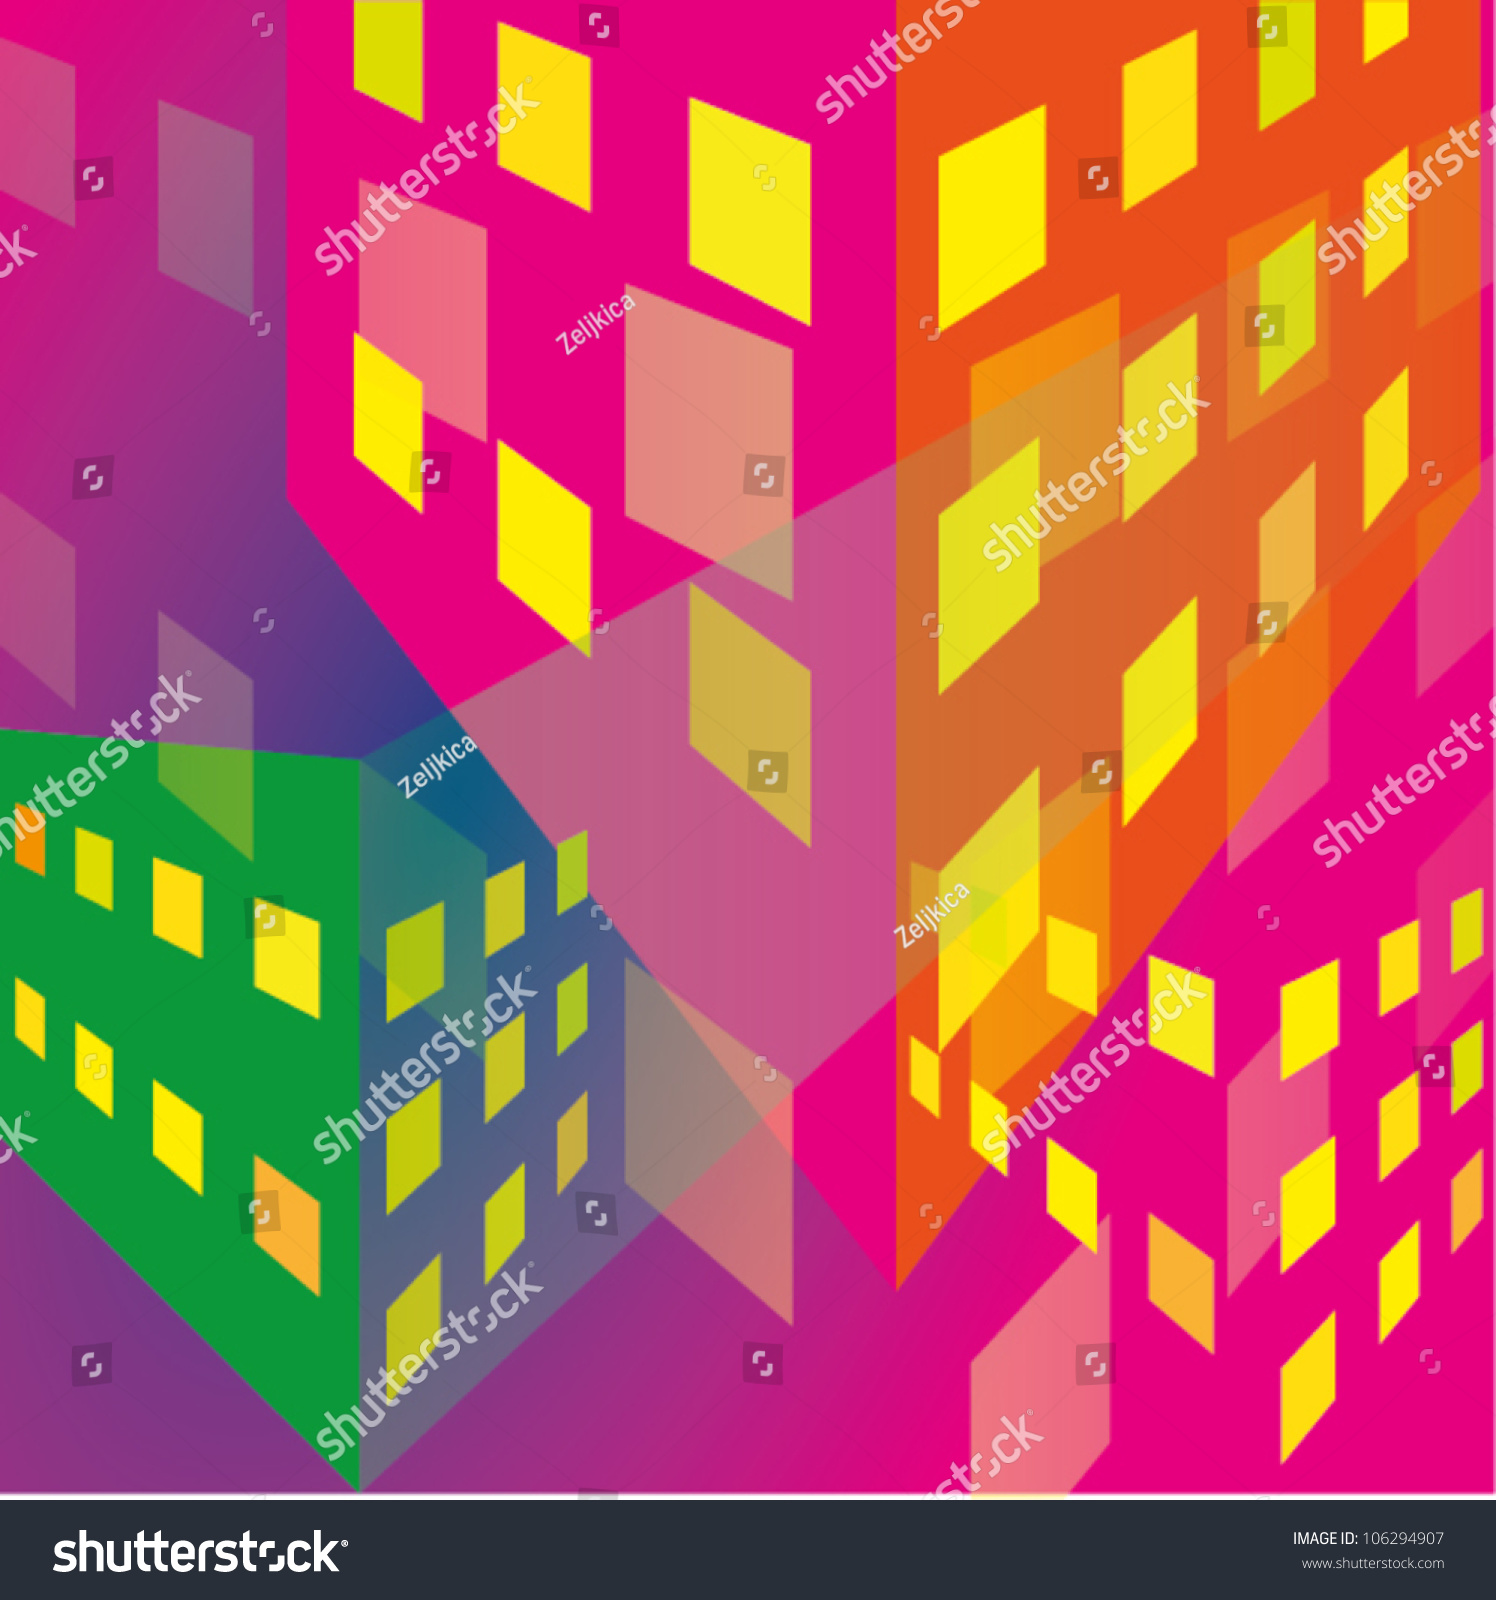 A Vector Illustration Of Buildings Background. - 106294907 : Shutterstock